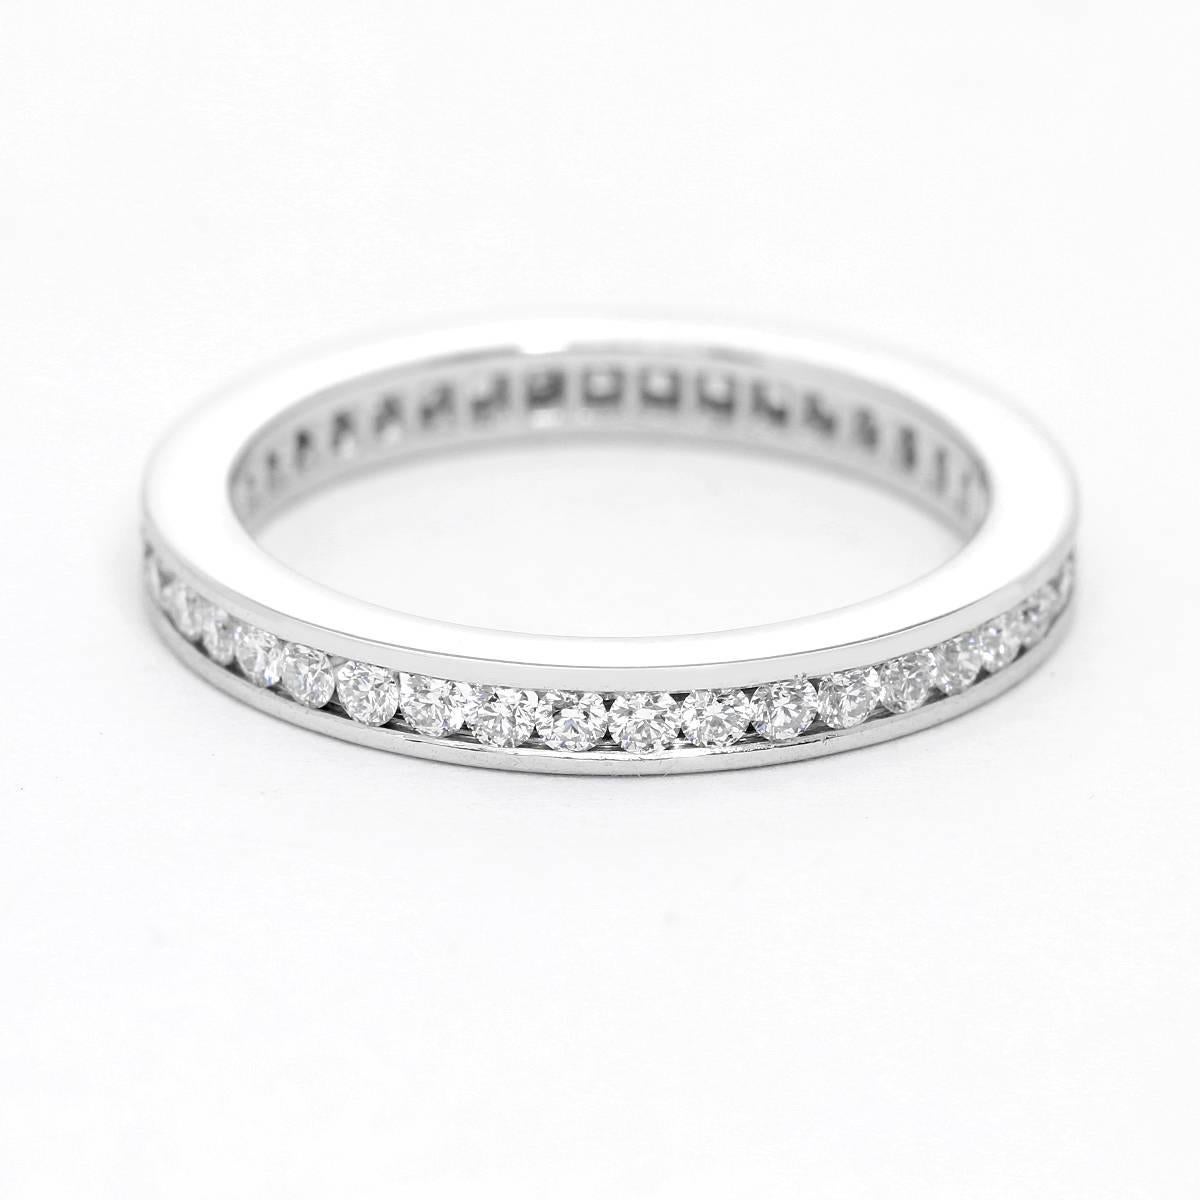 Cartier 1.9mm  Band Size  5 1/2 - . Pre-owned with Cartier box and papers .19 cts. Total weight 2.5 grams.